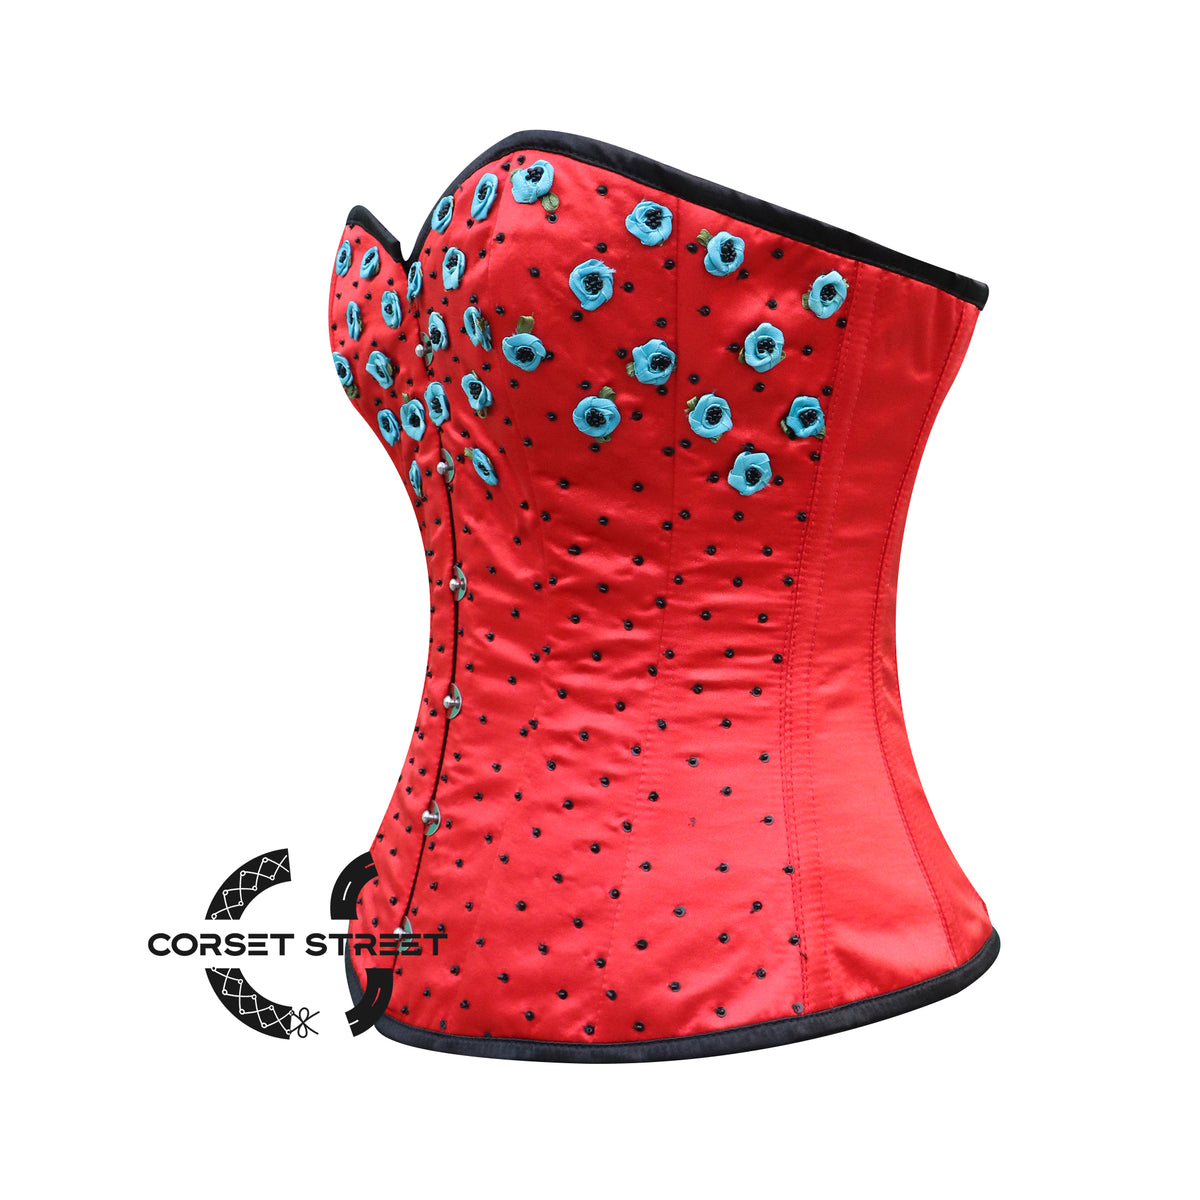 Red Satin Flowers And Sequins Hand Work Burlesque Gothic Costume Overbust Bustier Top